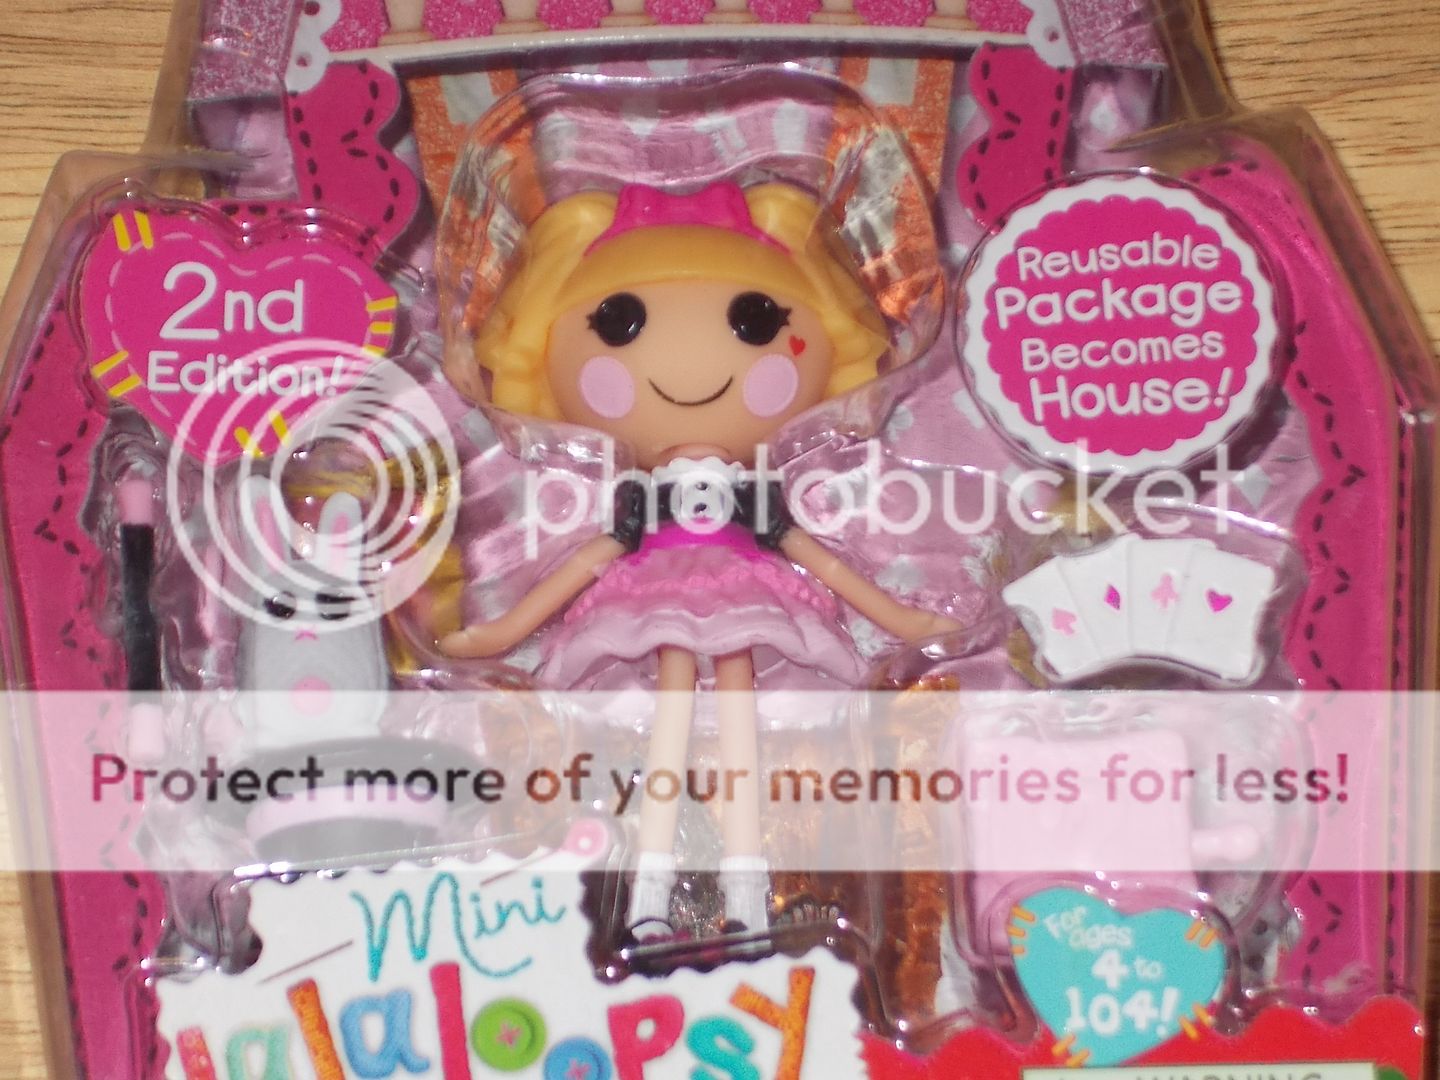 NEW Mini Lalaloopsy #6 Series 4 Misty Mysterious Doll MISTYS FULL OF